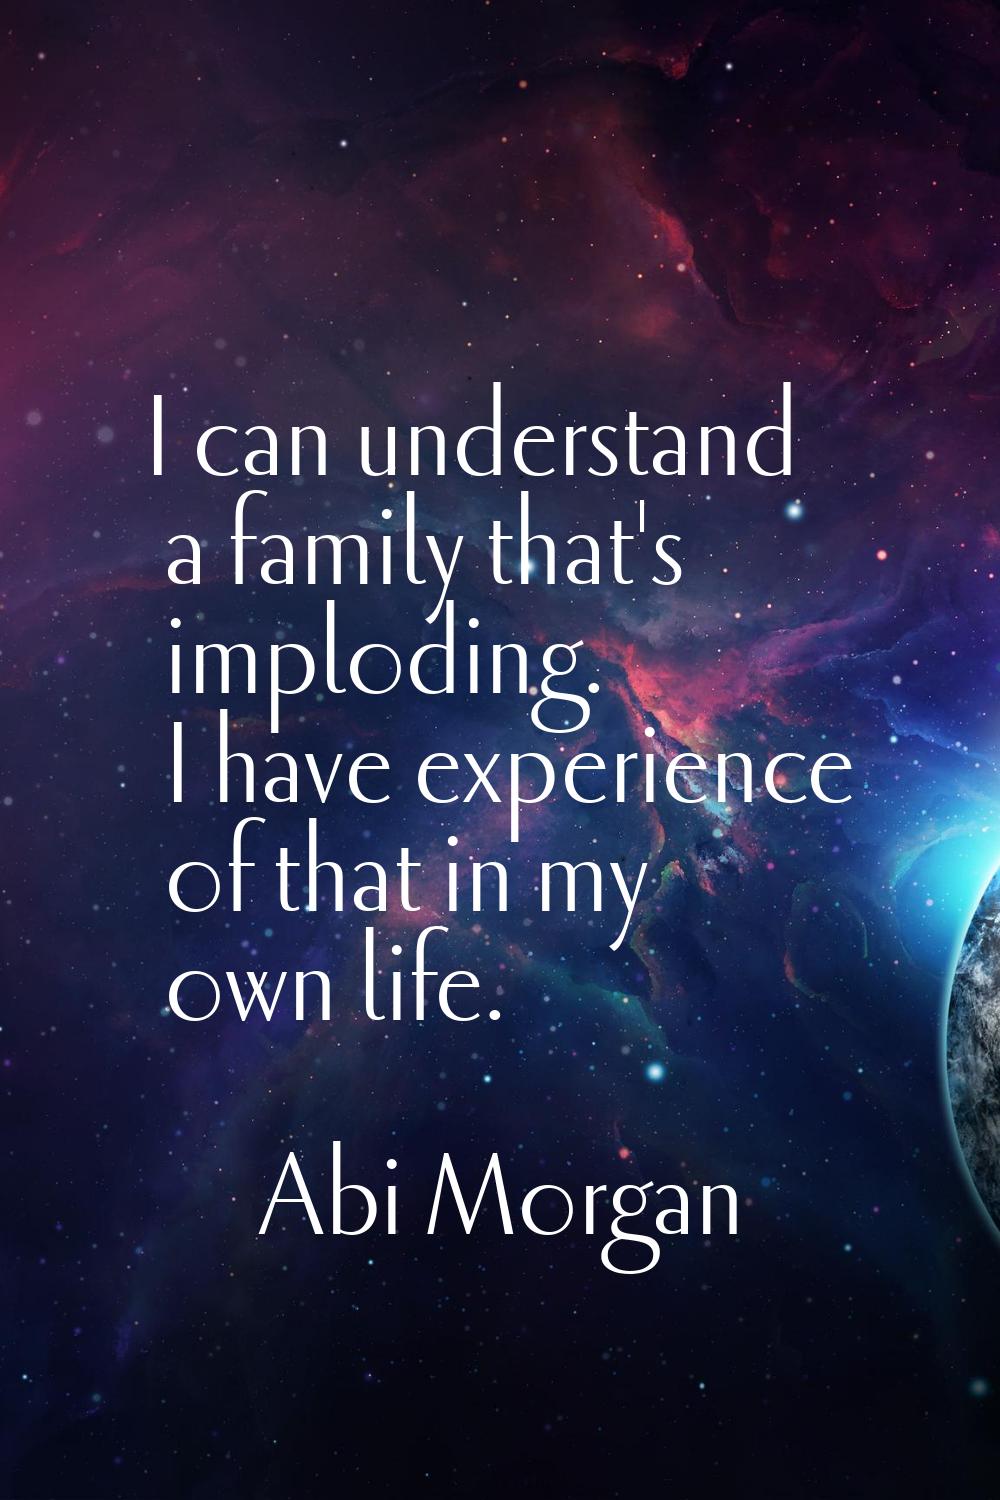 I can understand a family that's imploding. I have experience of that in my own life.